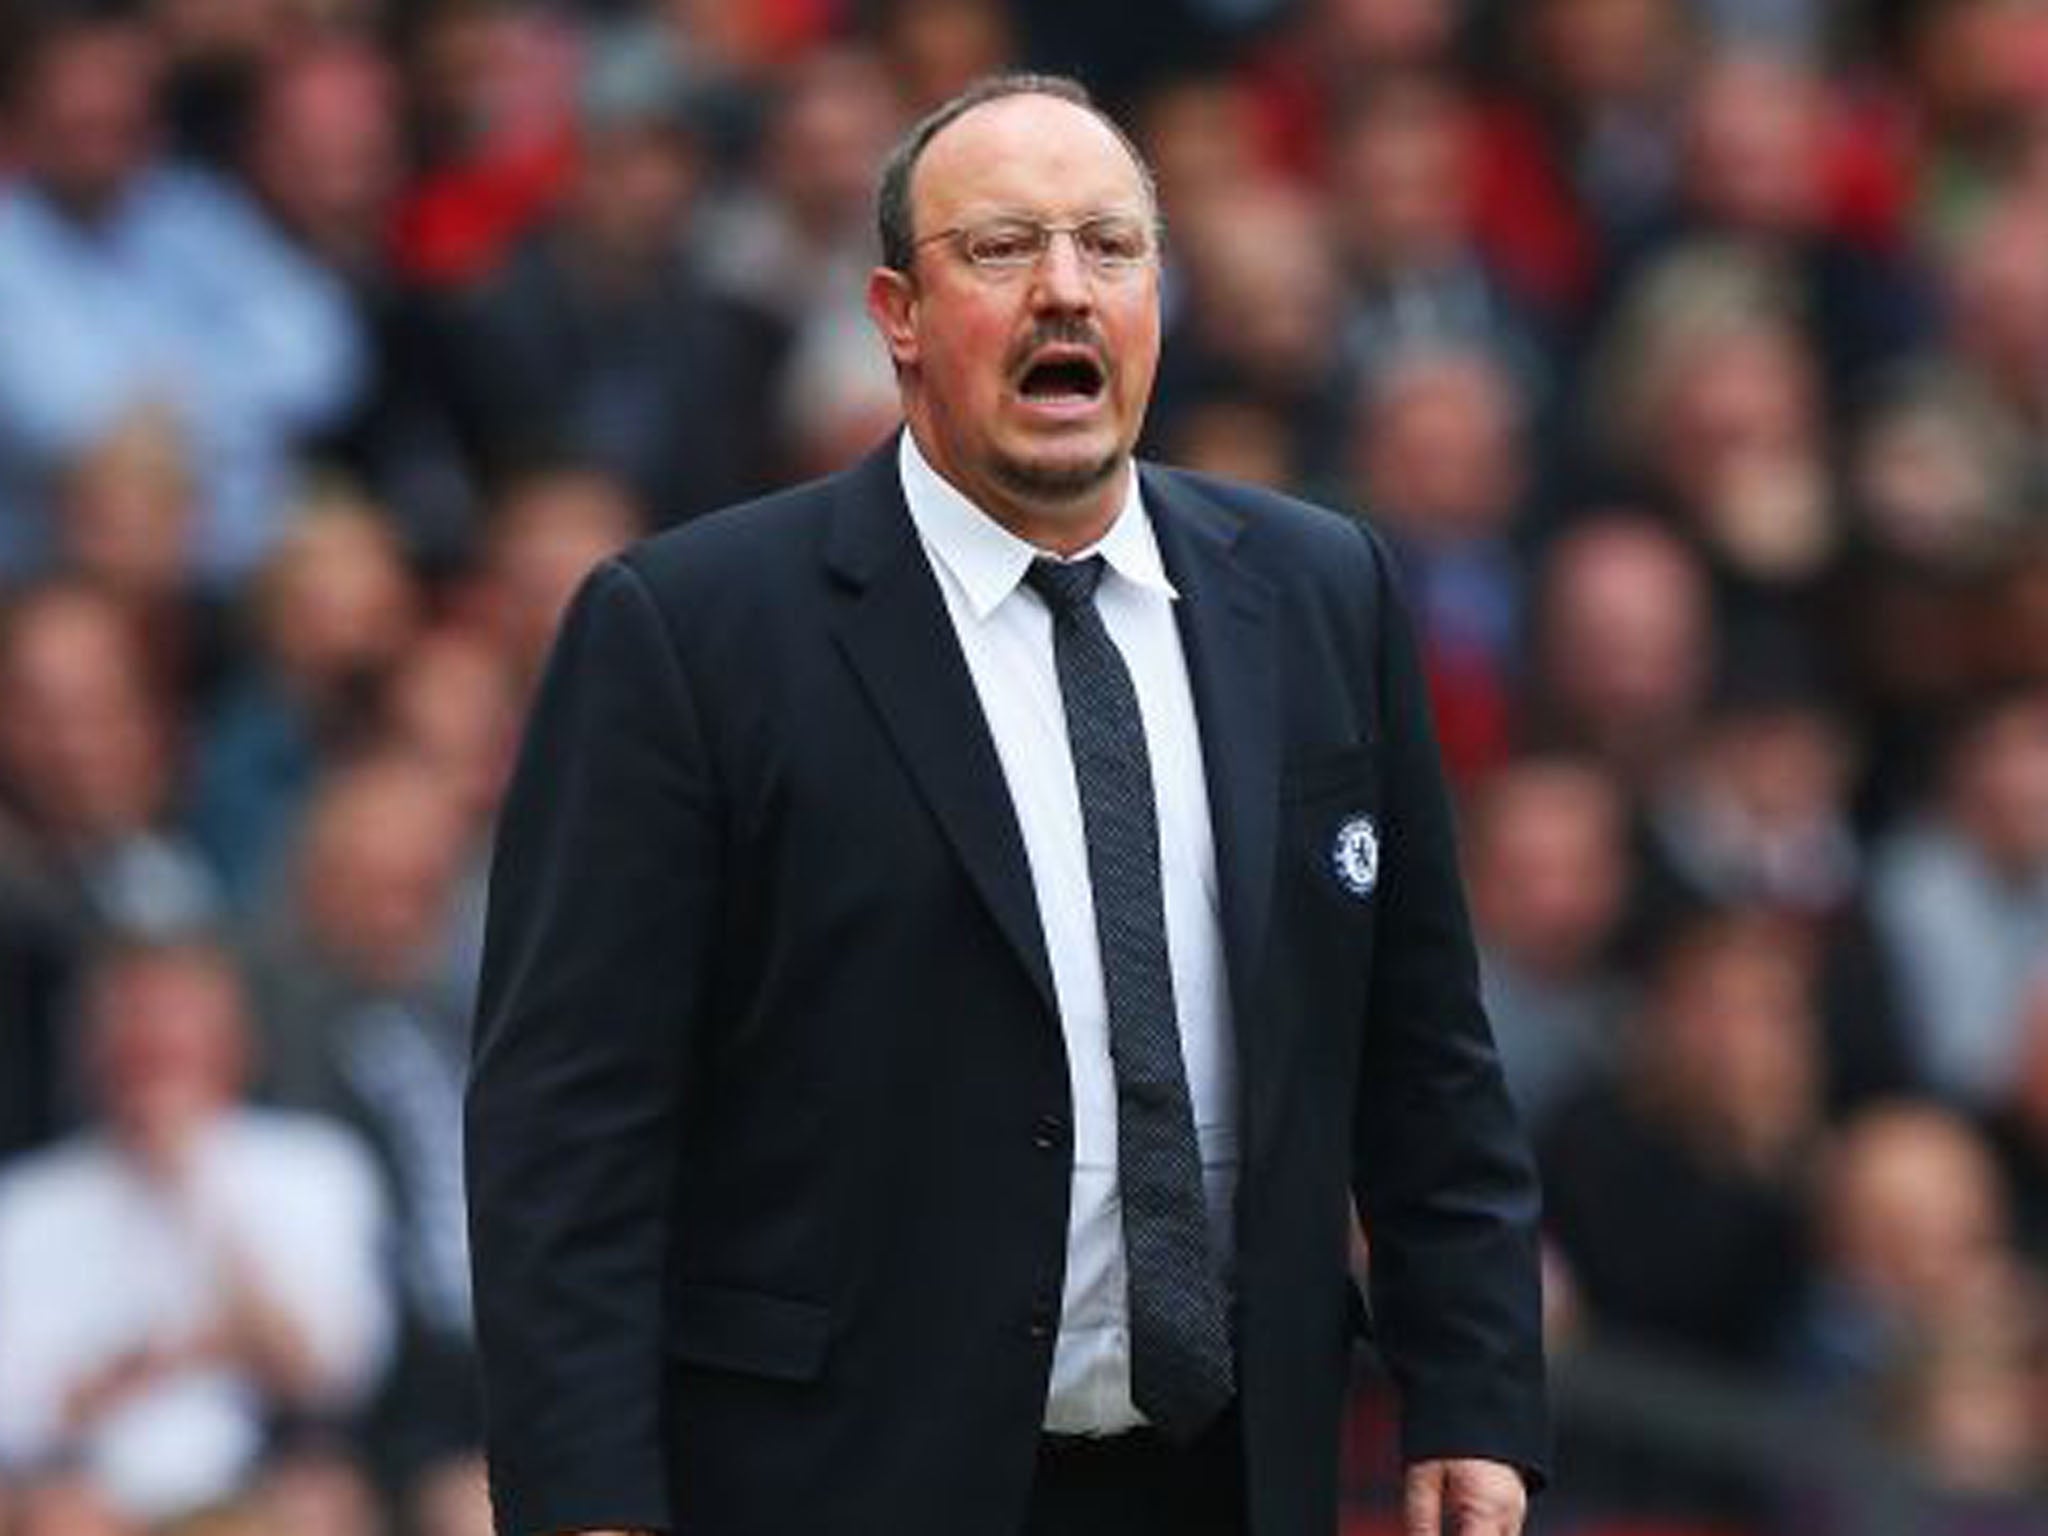 Rafa Benitez, the Chelsea manager, called the win a “massive result” for the club as the edged closer to securing the Champions' League qualification he was tasked with delivering (Alex Livesey/Getty Images)